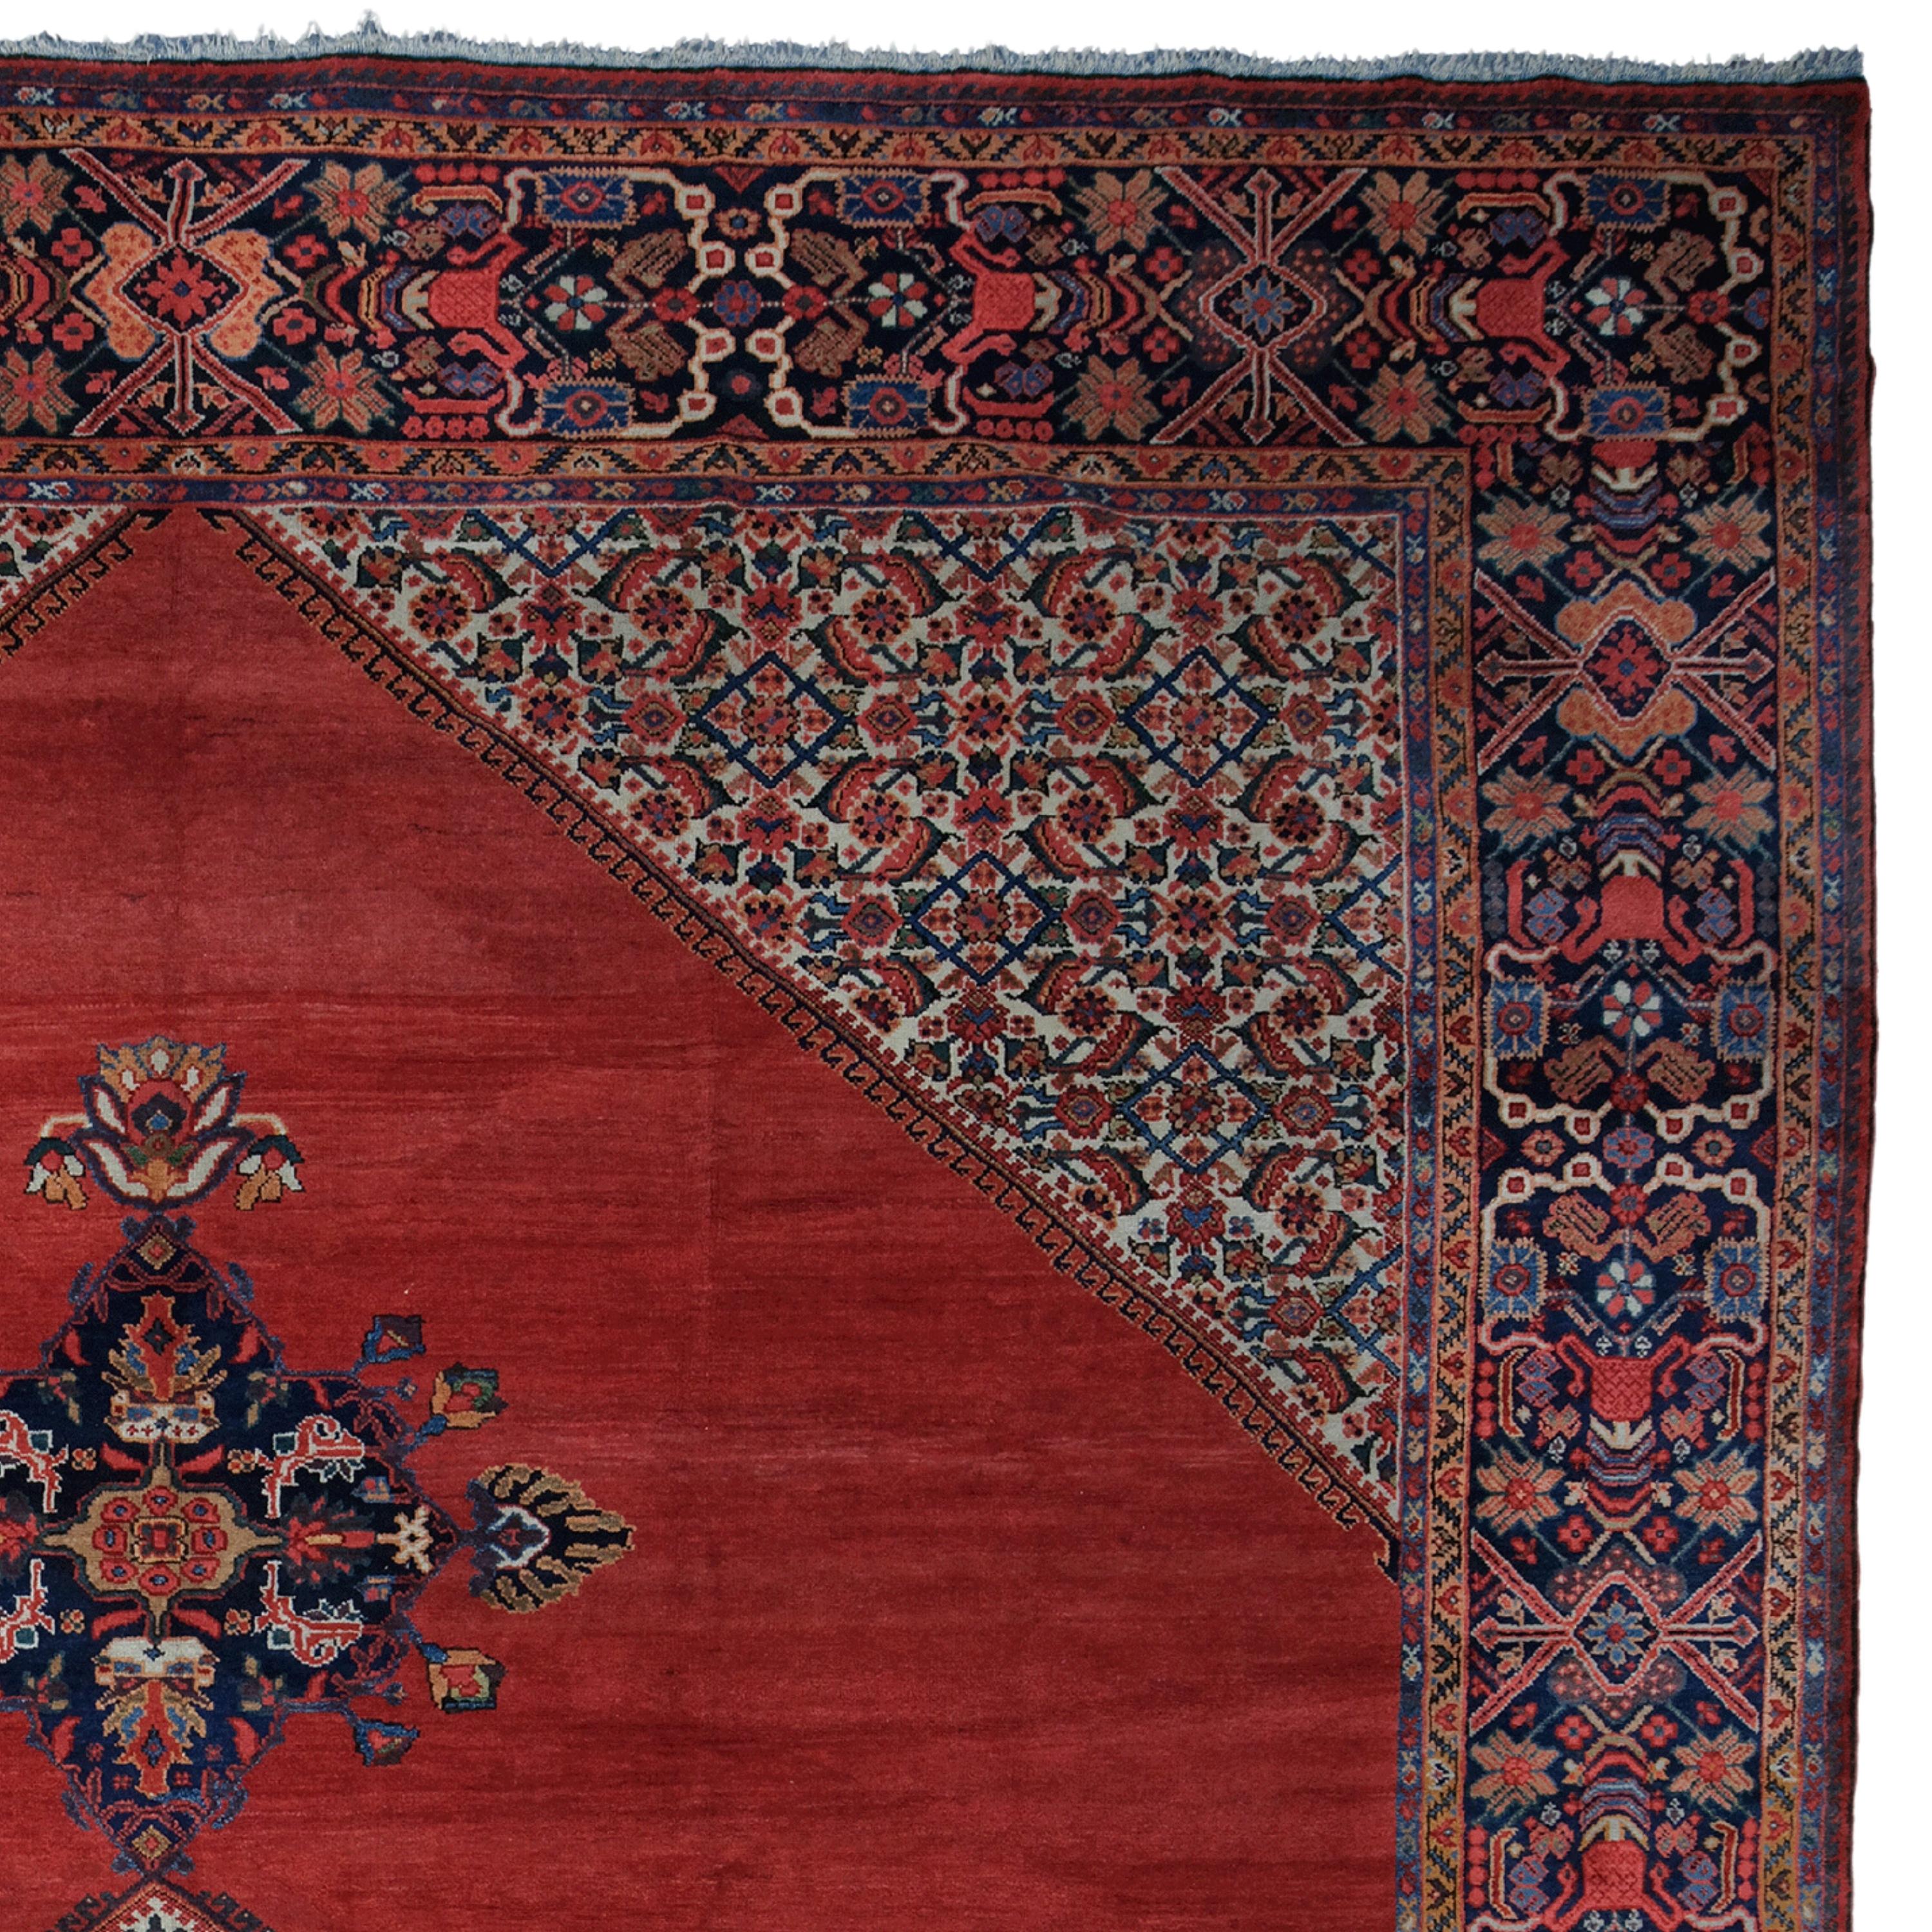 Antique Mahal Rug - Late of 19th Century Mahal Rug, Antique Rug, Handmade Rug In Good Condition For Sale In Sultanahmet, 34